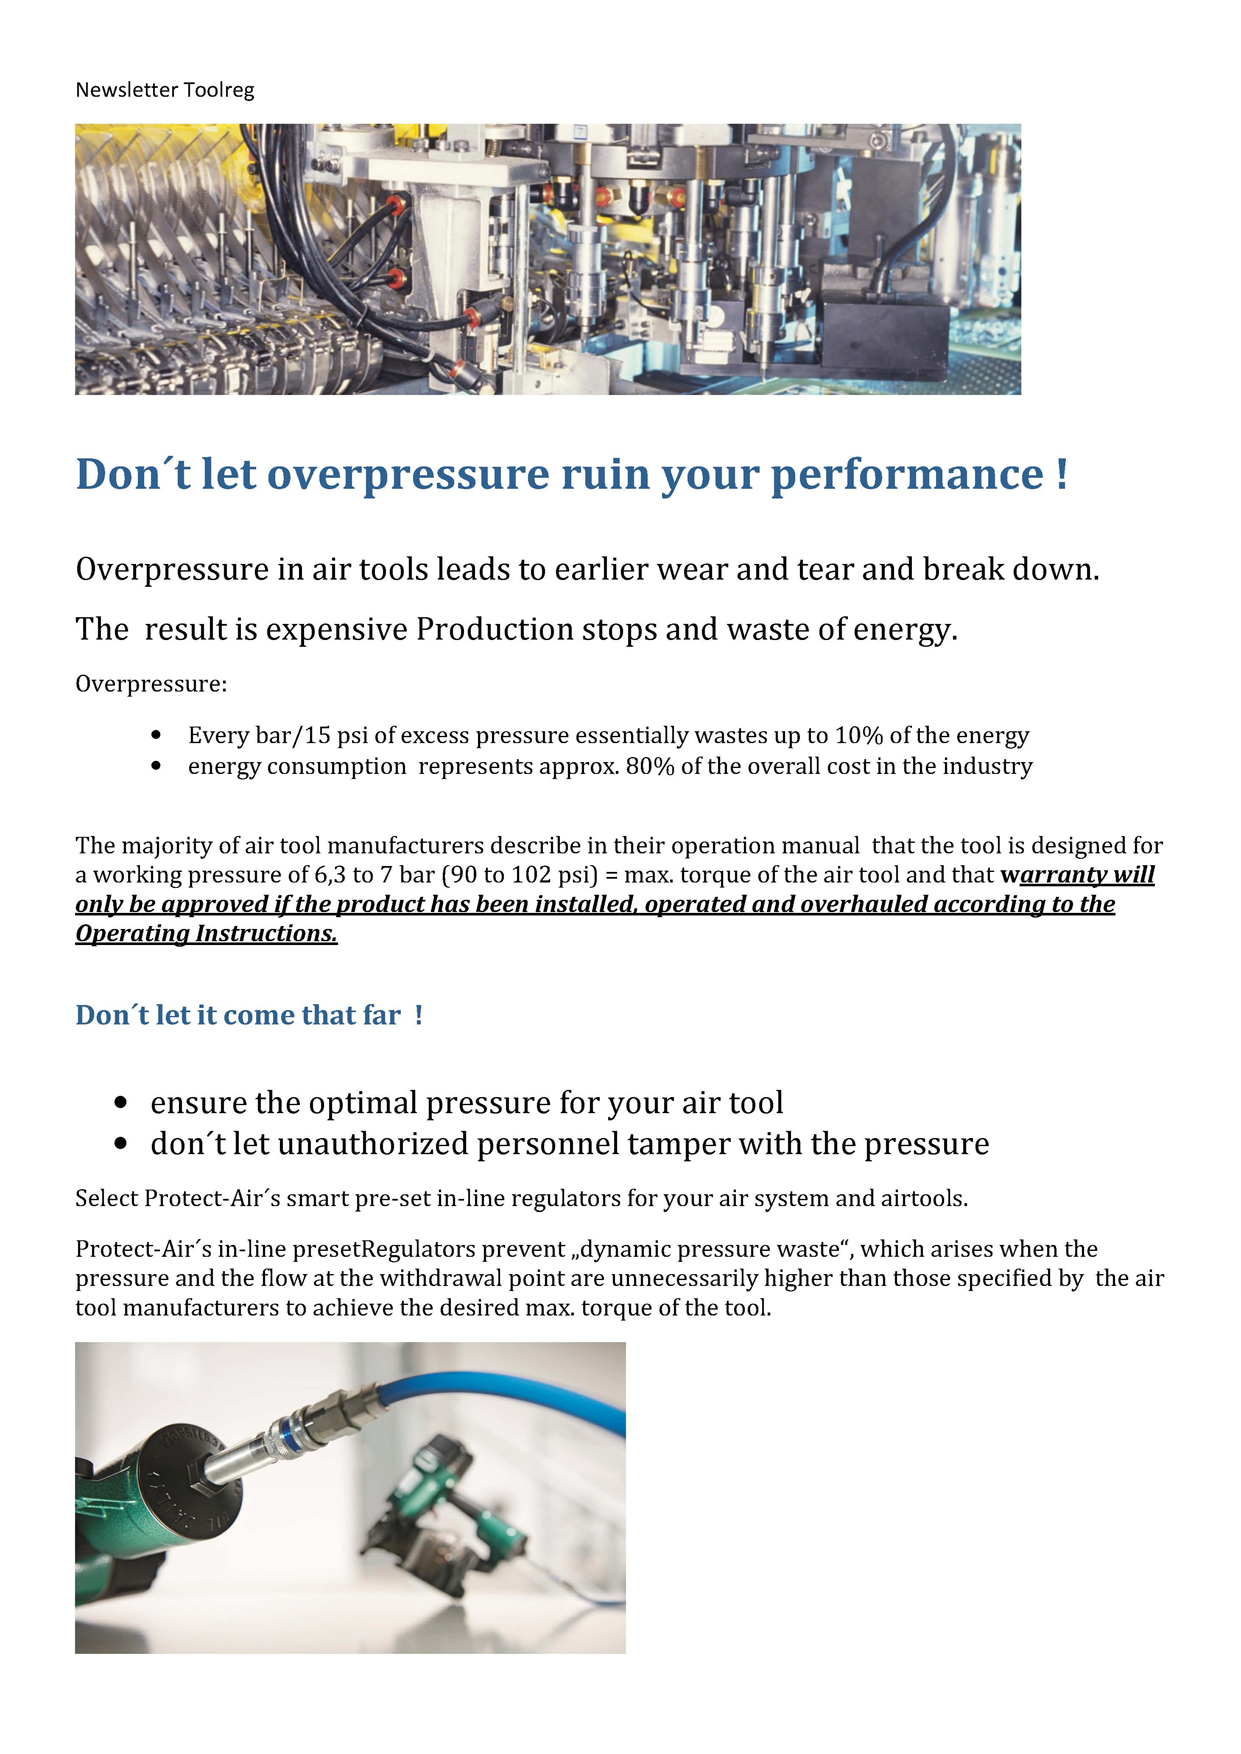 Don't let overpressure ruin your performance